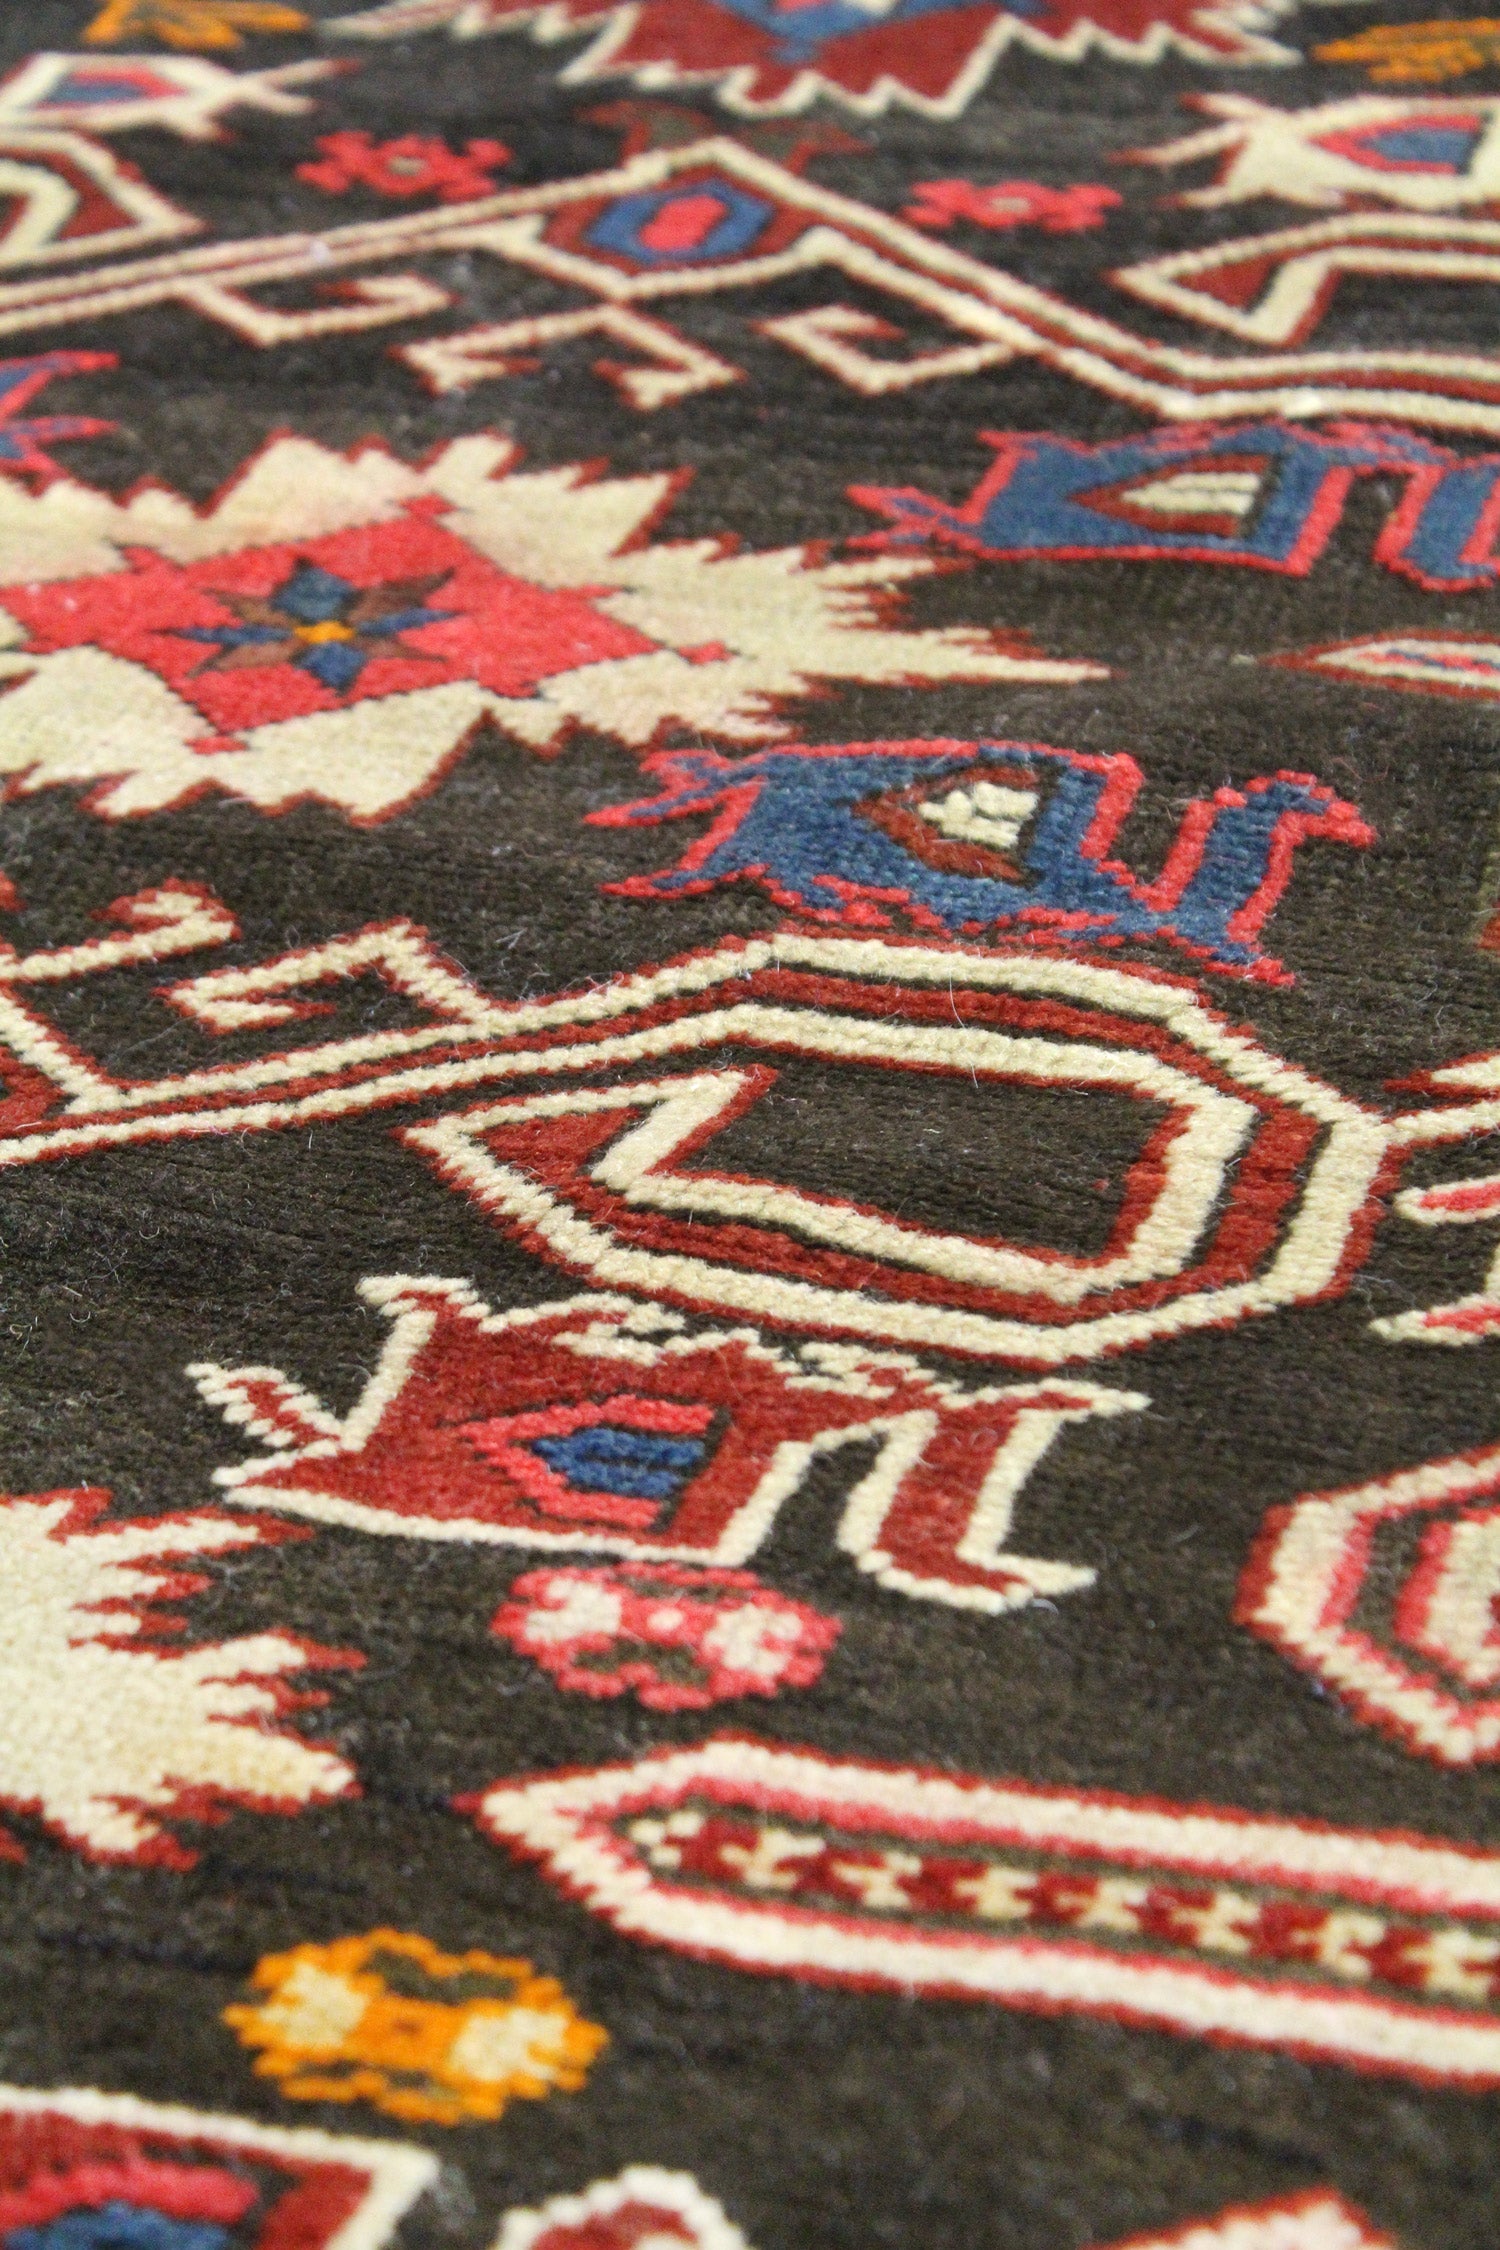 Antique Perpadil Handwoven Tribal Rug, JF8459